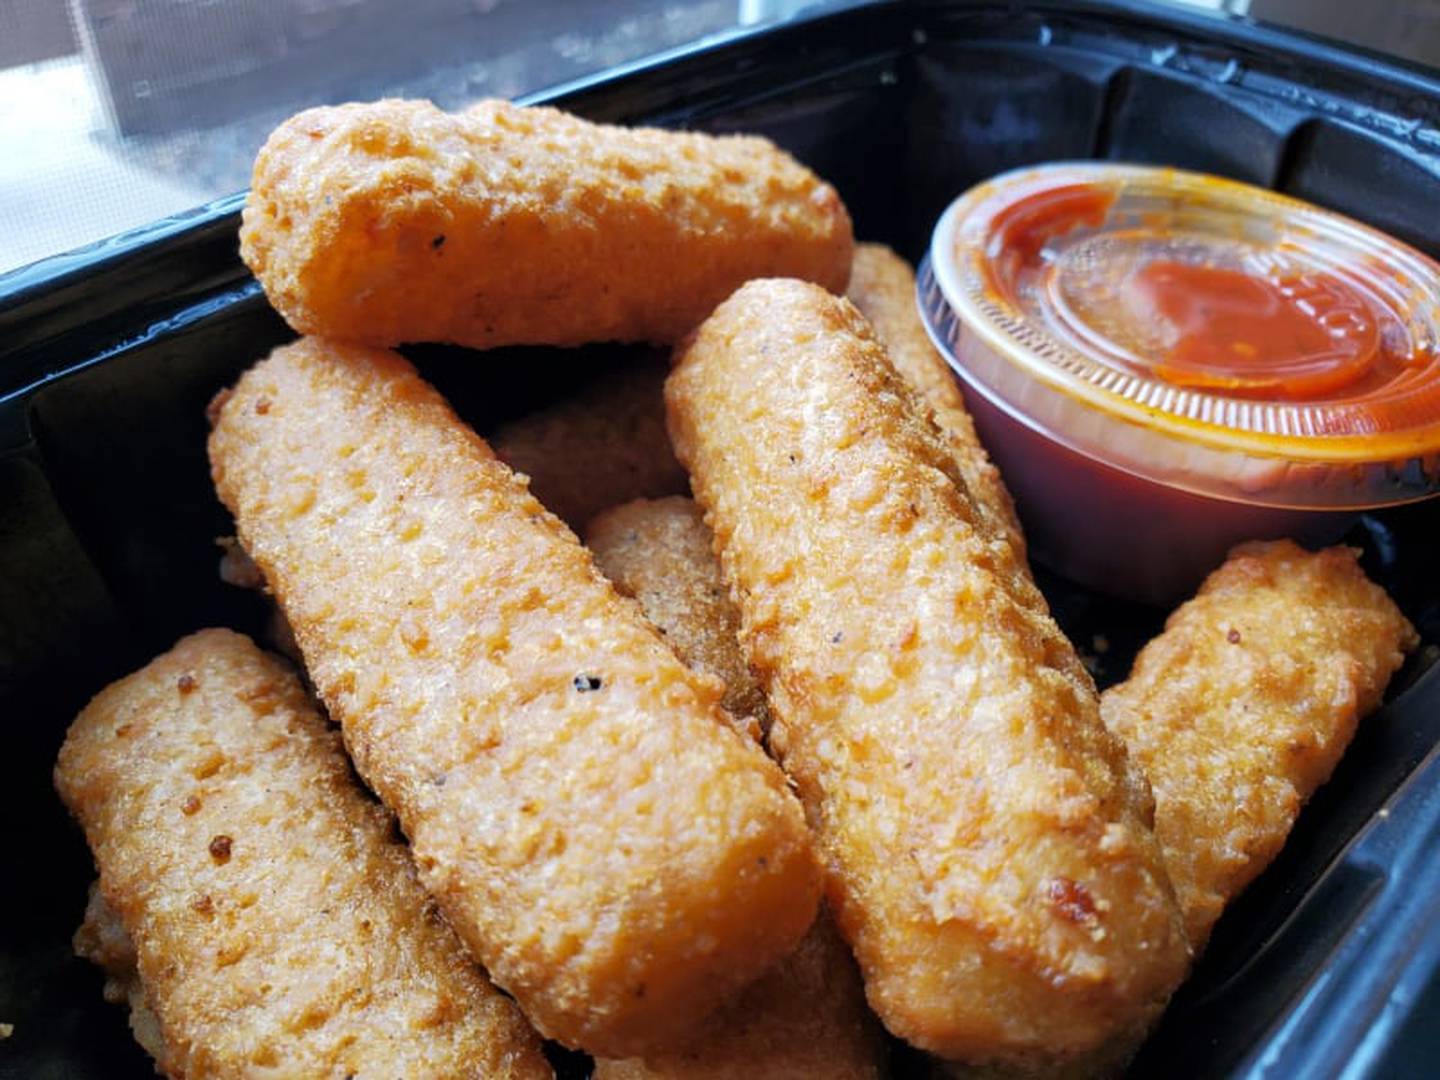 The mozzarella sticks from Jameson's Pub in Joliet were “stuffed full of cheese) and had a nice crunchy outside.